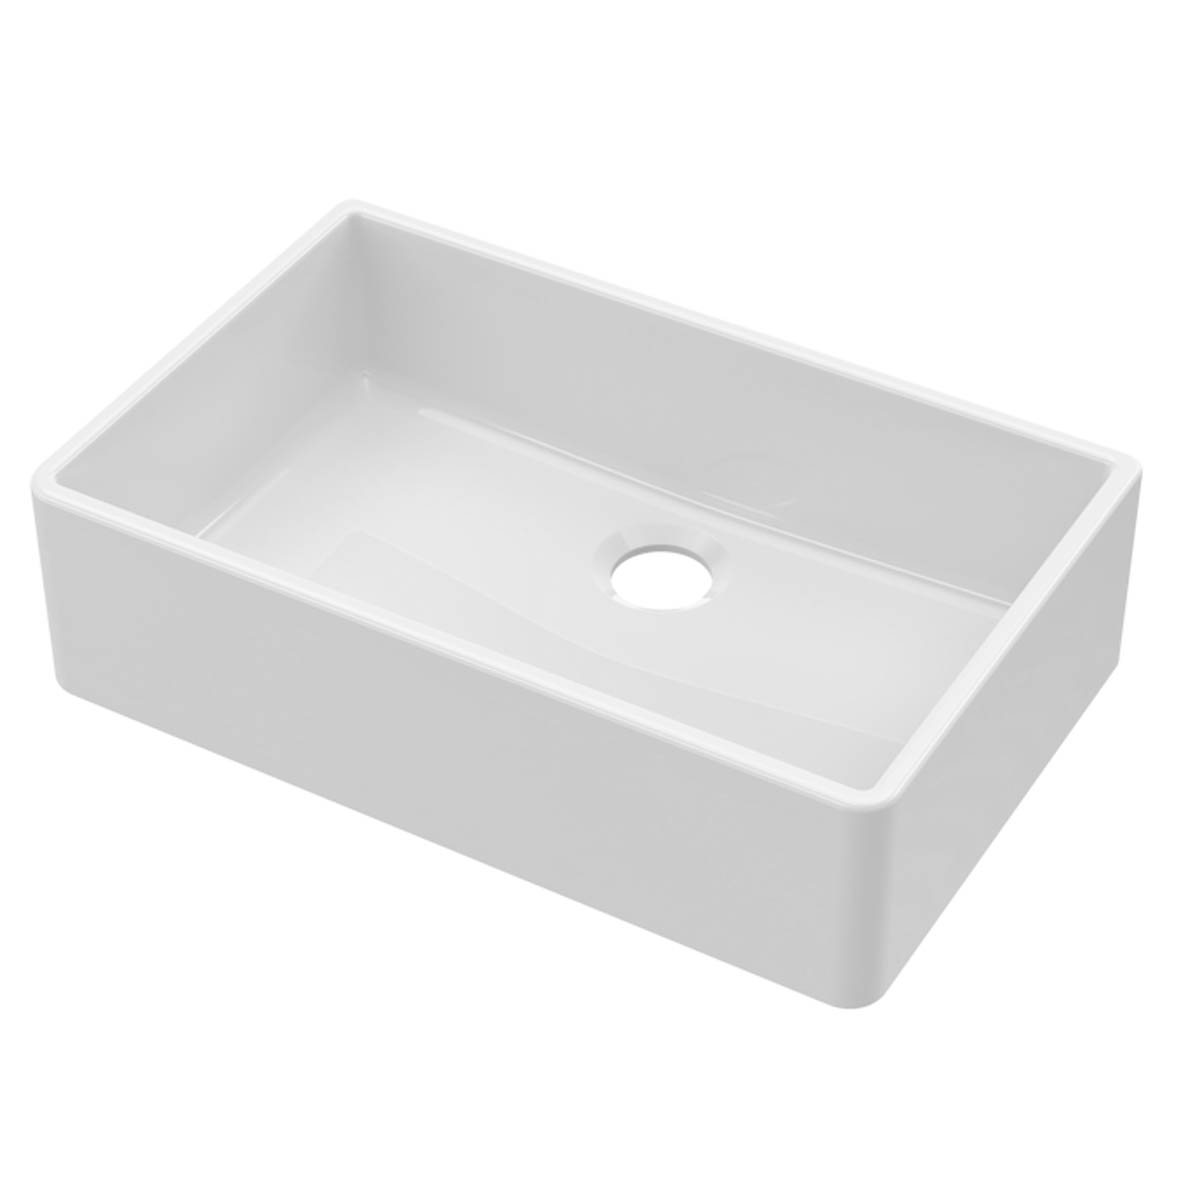 Nuie Butler 795x500x220mm Fireclay Sink with Central Waste - White (20288)